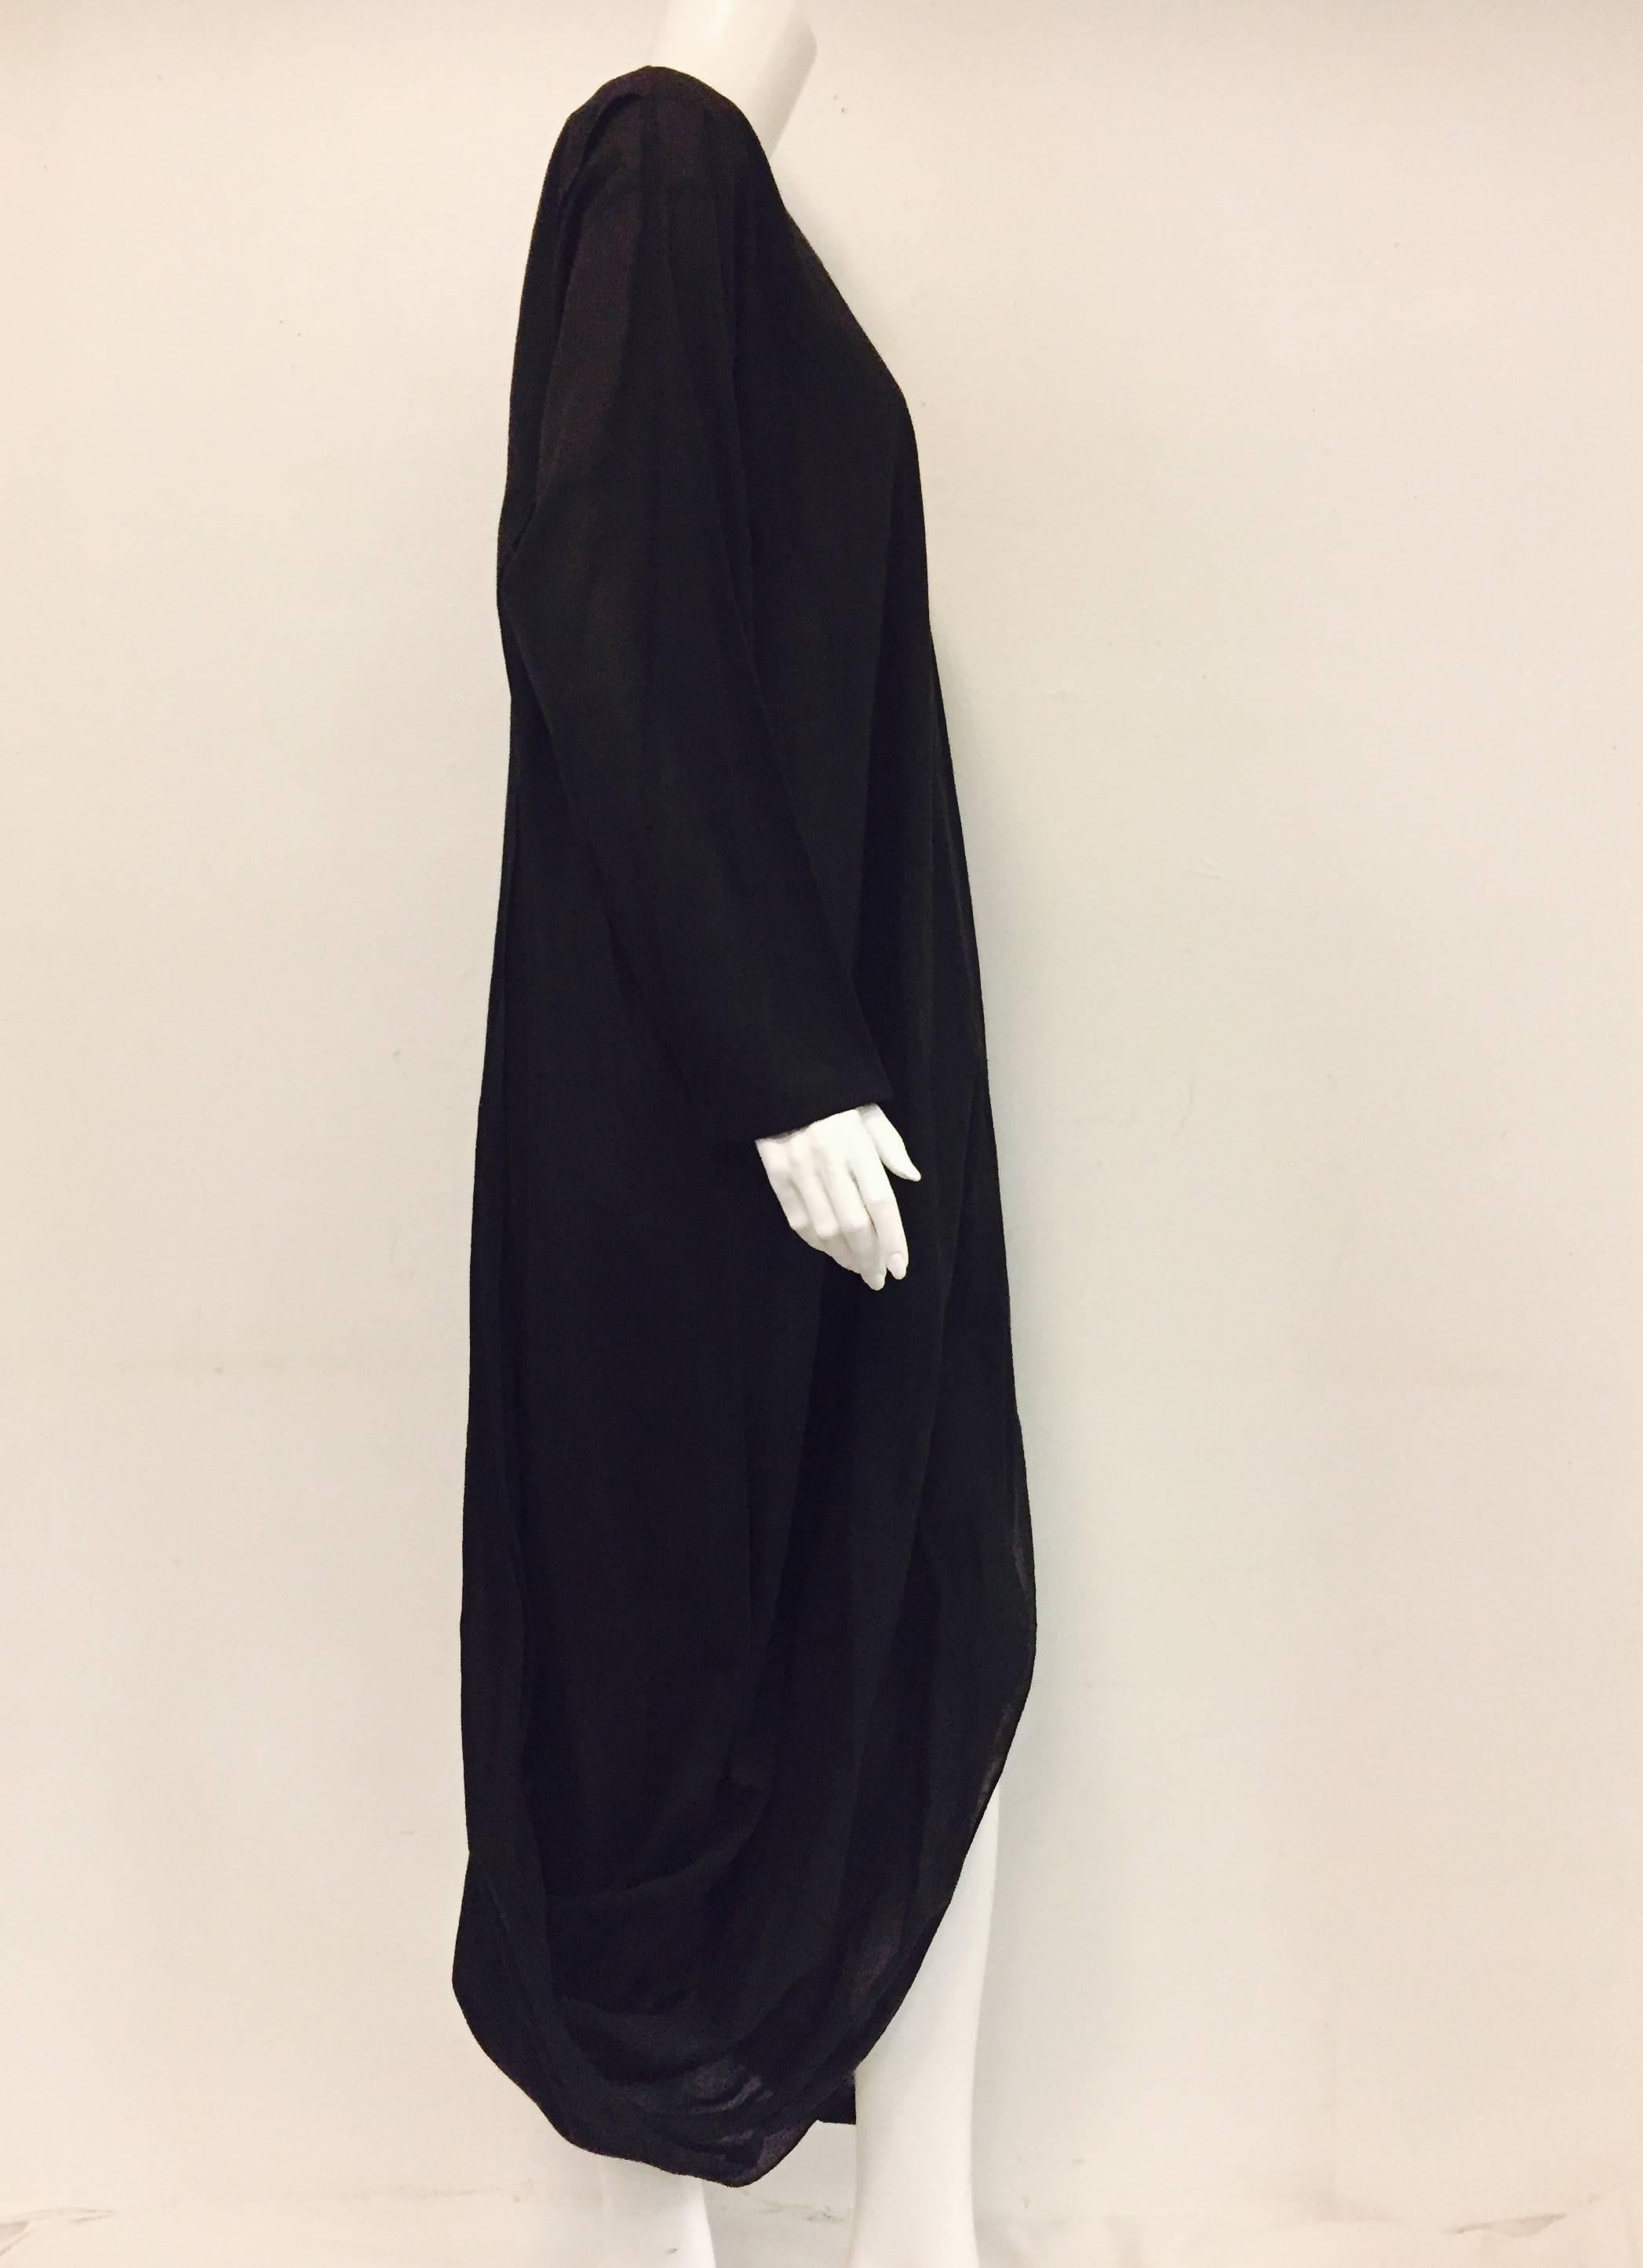 Issey Miyake creates a casual yet intriguing unstructured design with this loose fitting long black dress.  It is creative with a slit from shoulder to hem and up the back of the dress.  Long sleeves with no collar.  Made in Japan.